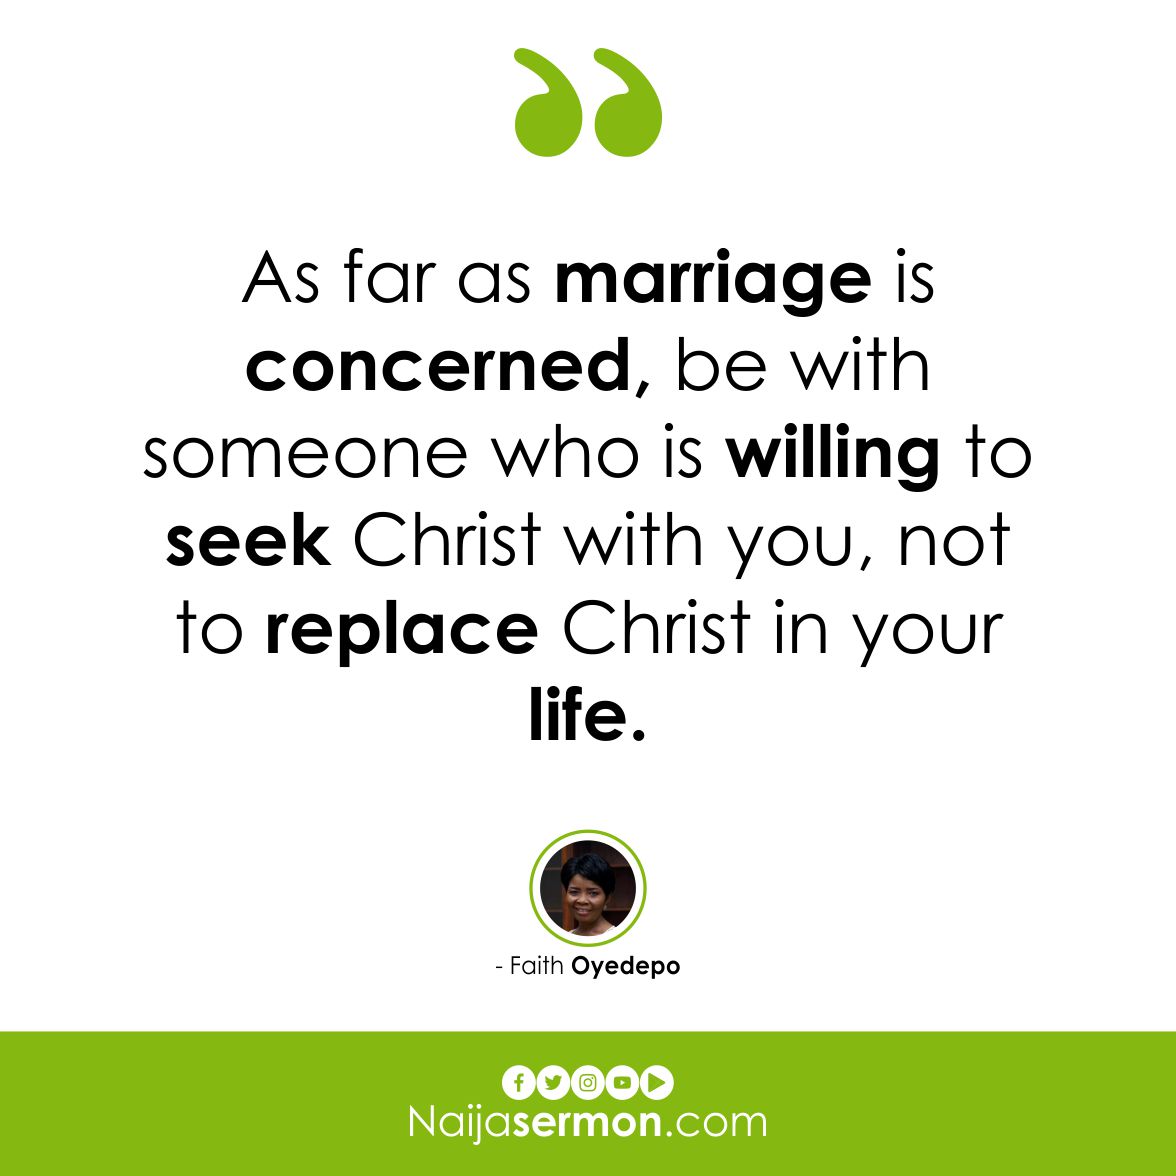 Quote of the Day by Faith Oyedepo 1